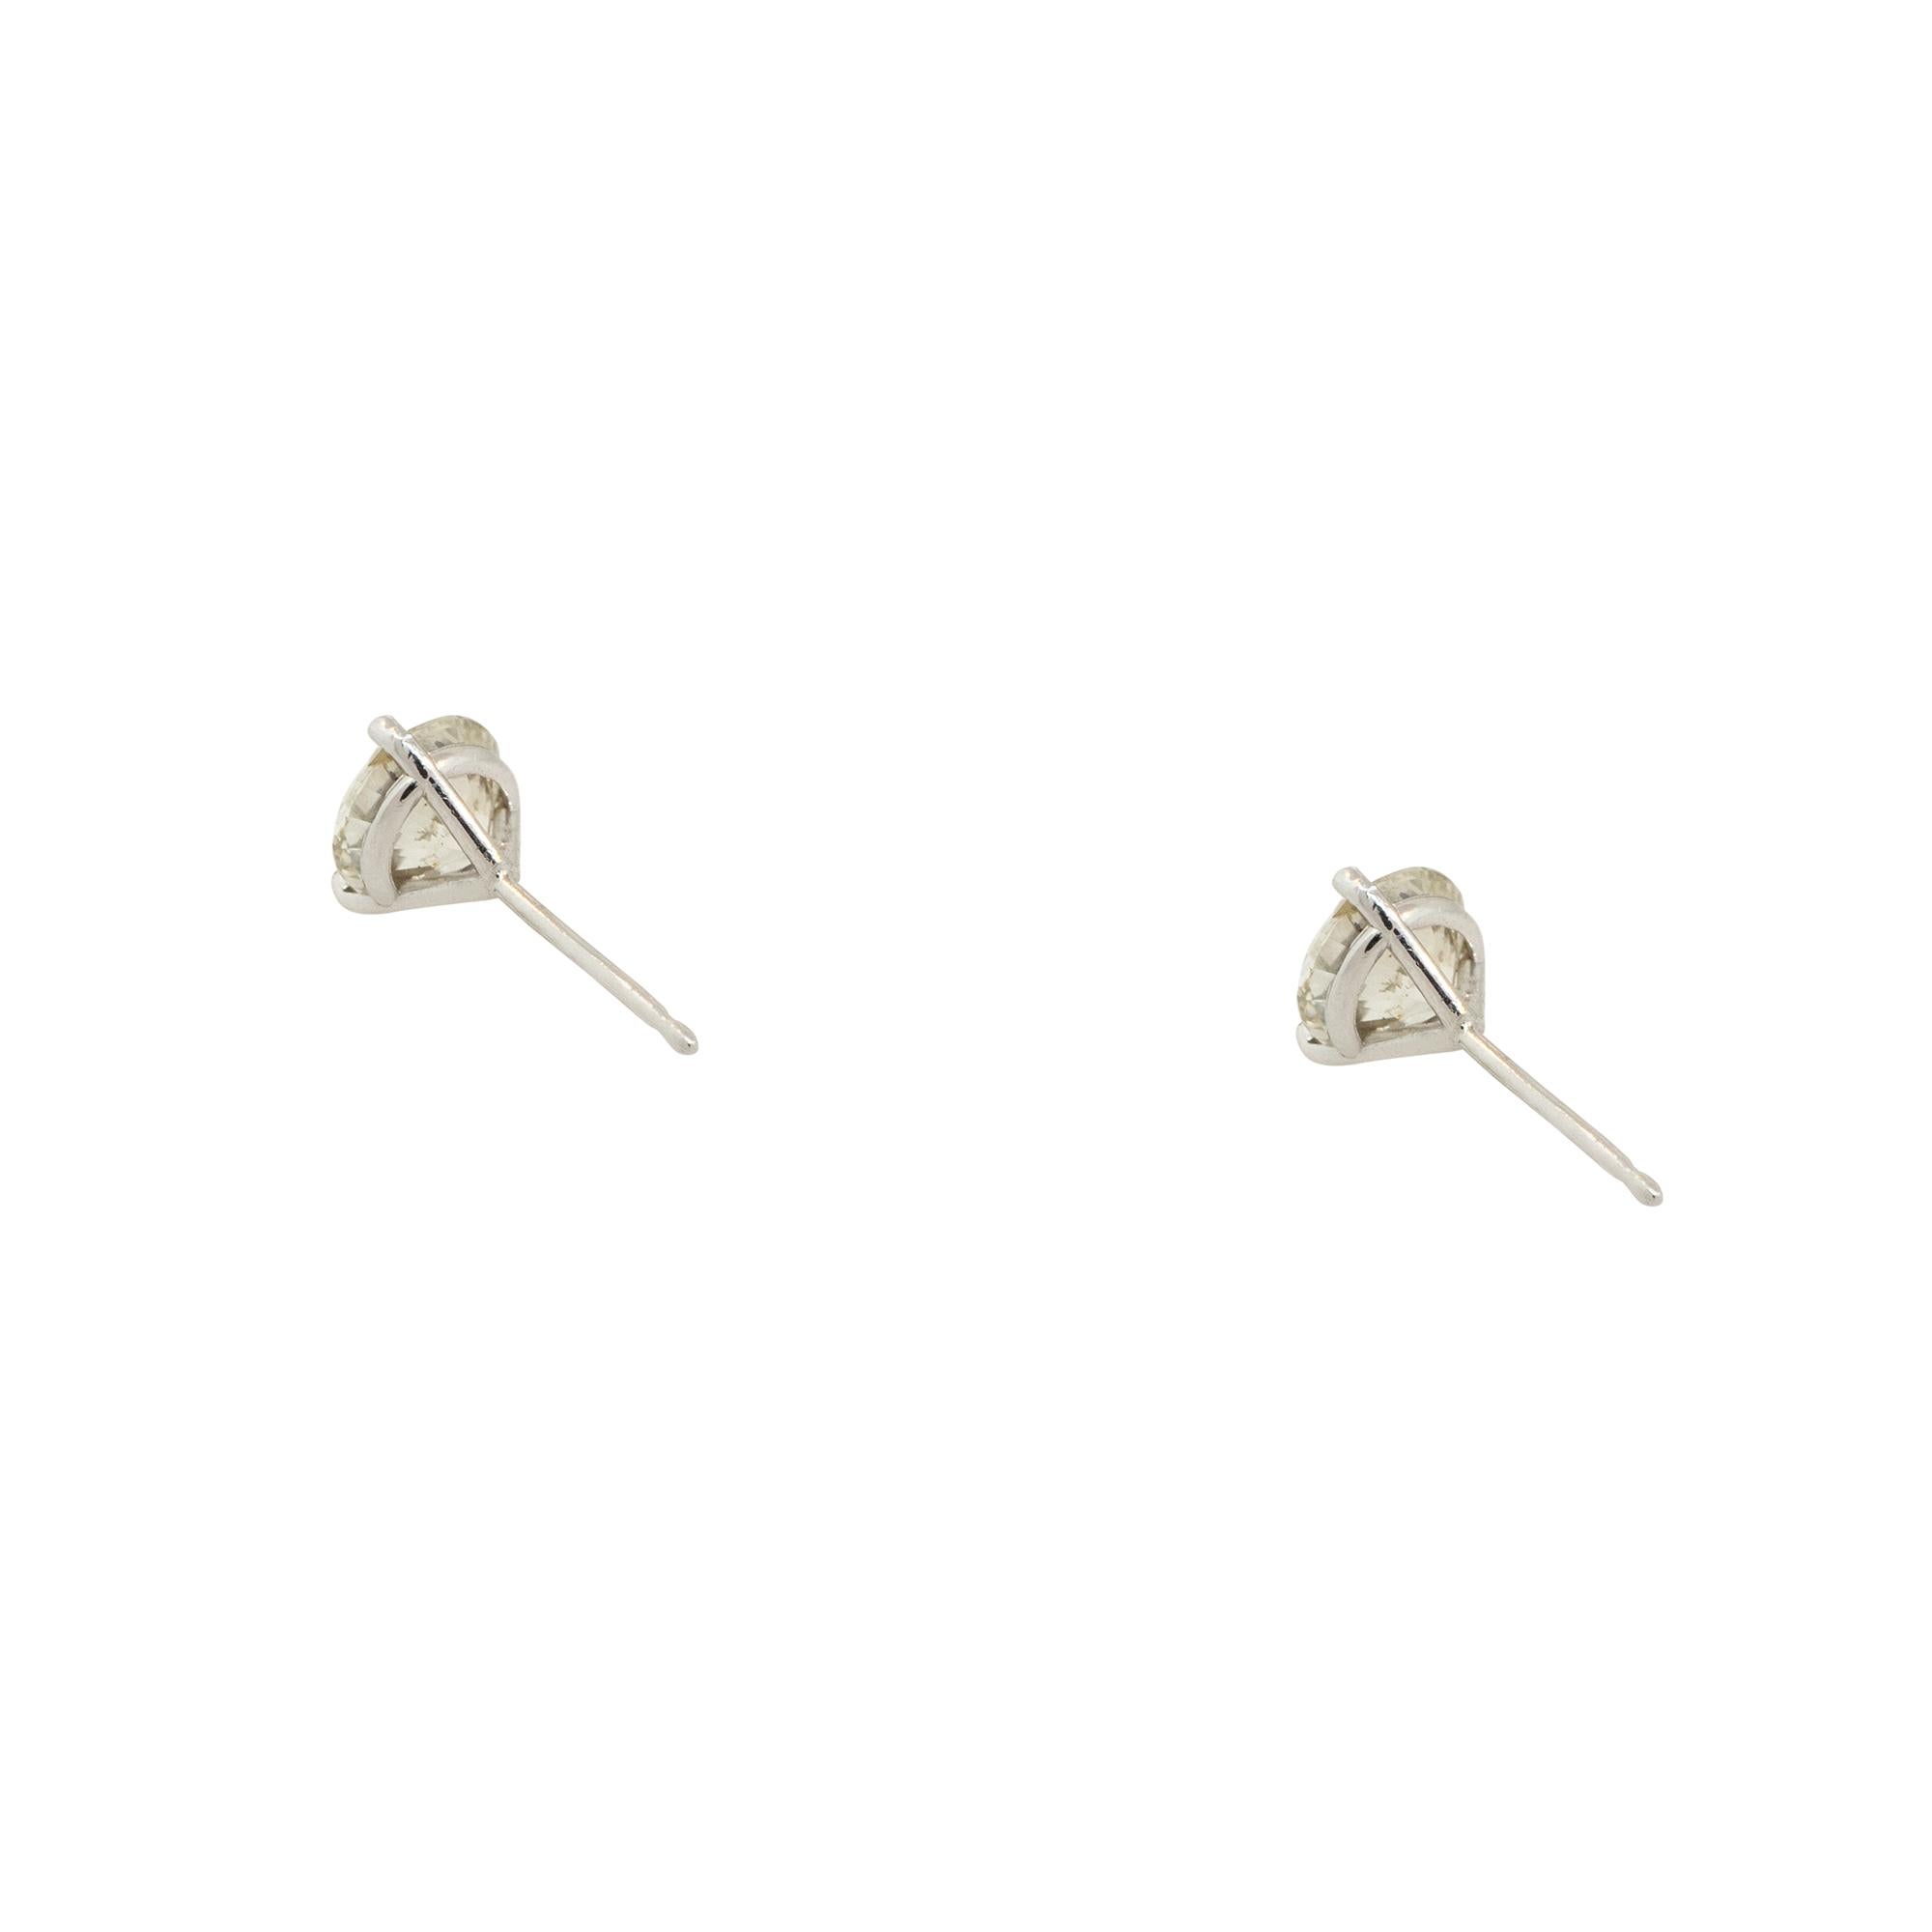 Material: 14k White Gold
Diamond Details: Approx. 2.02ctw of Round Cut Diamonds. Diamonds are K/L in color and SI1-I1 in clarity
Total Weight: 1.2g (0.7dwt)
Earring Backs: Friction Backs
Dimensions: 6.80mm x 15mm
Additional Details: This item comes